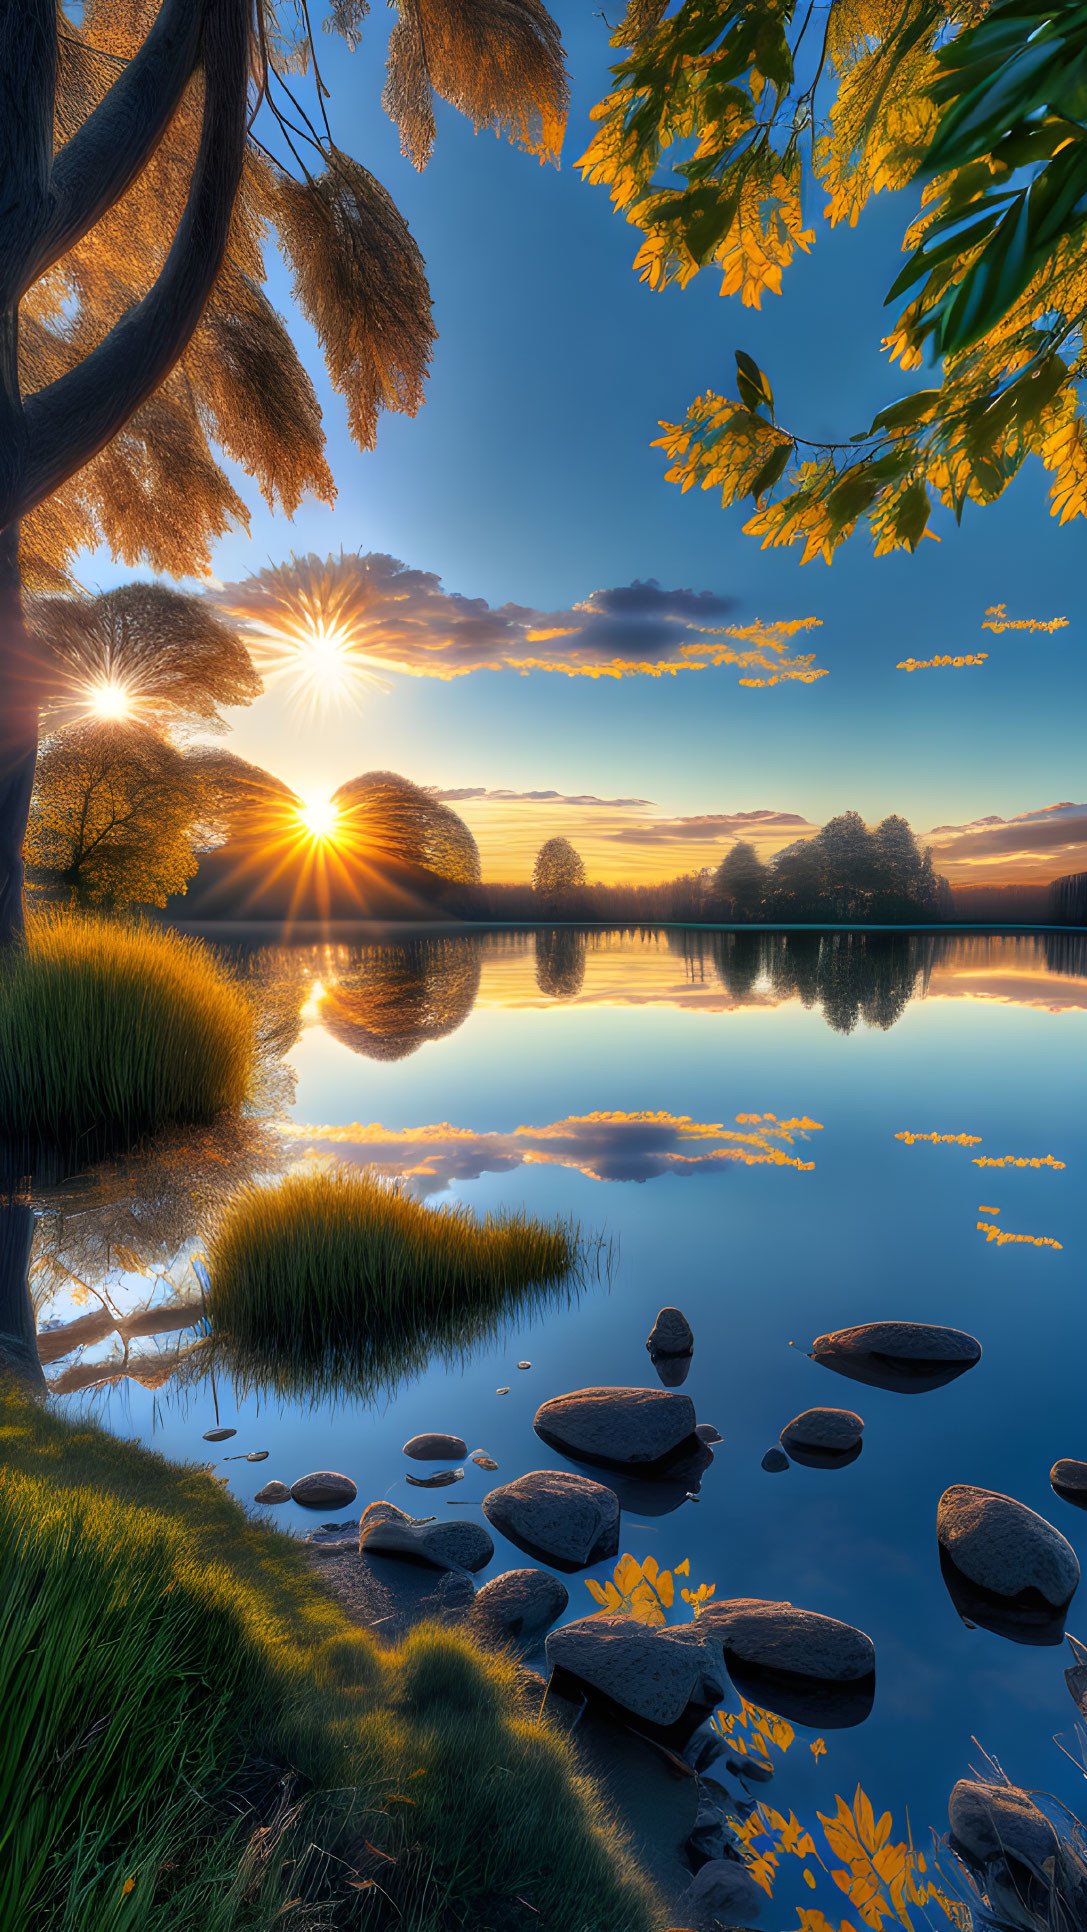 Tranquil sunset over calm lake with stepping stones and autumn leaves.